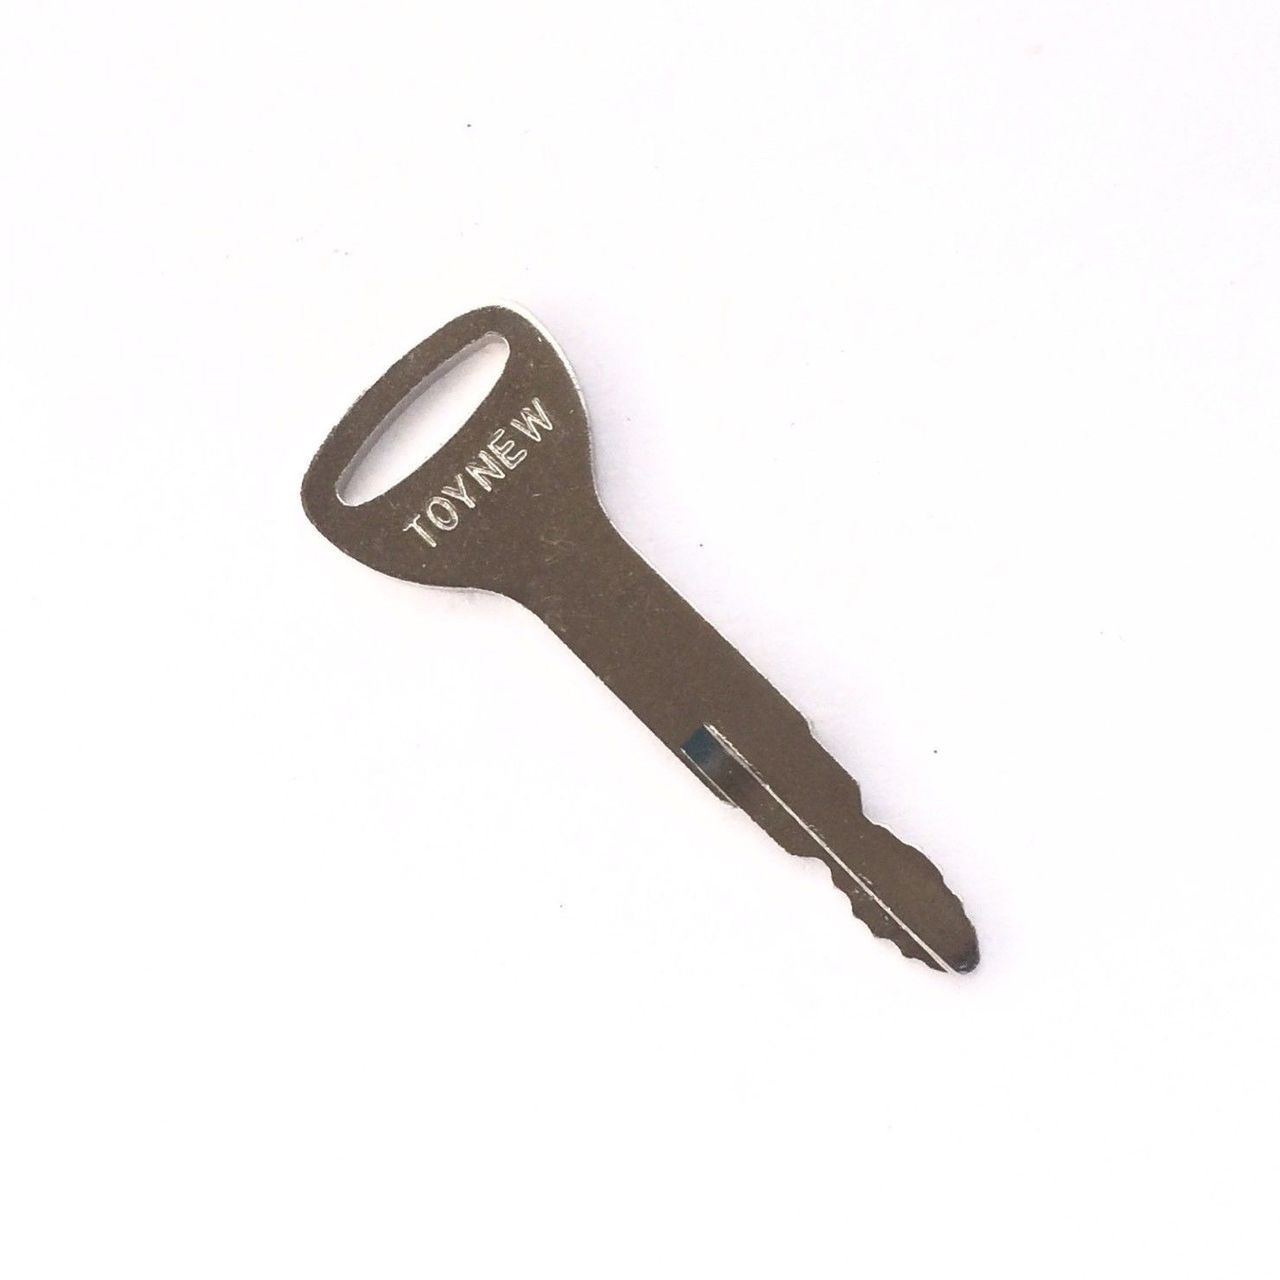 Toyota Forklift Ignition Key 57591-23330-71 replaces A62597